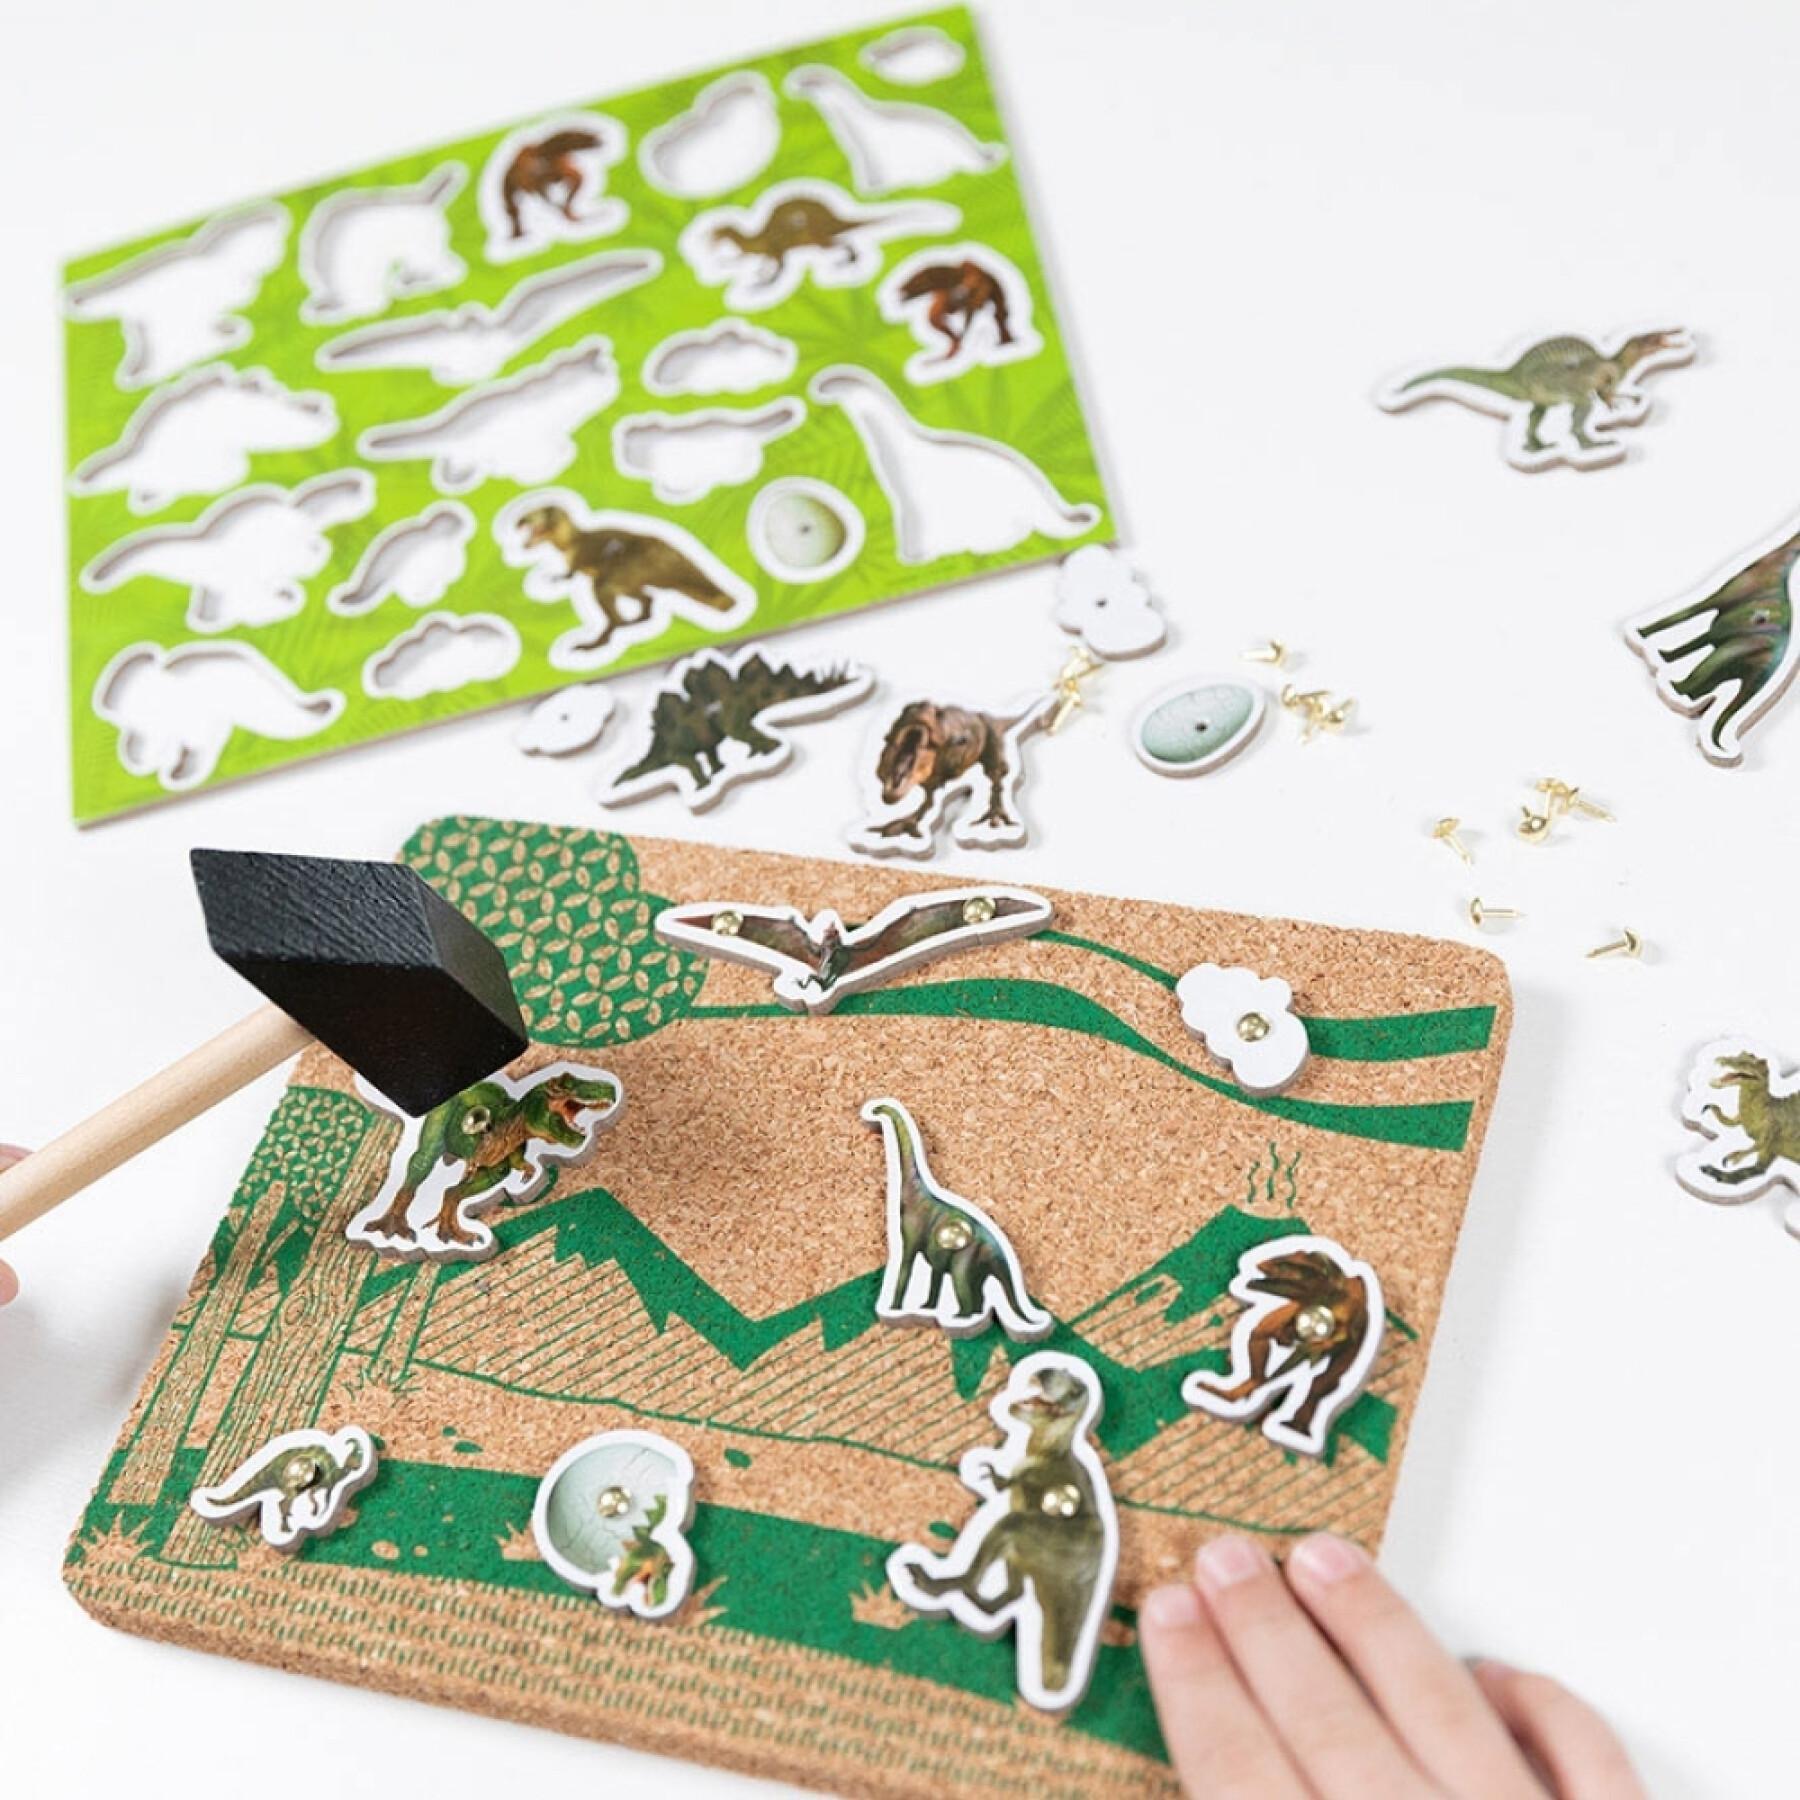 Carpenter's apprentice game with dinosaur figurines + cork plate printed on two sides Totum Dino Forever